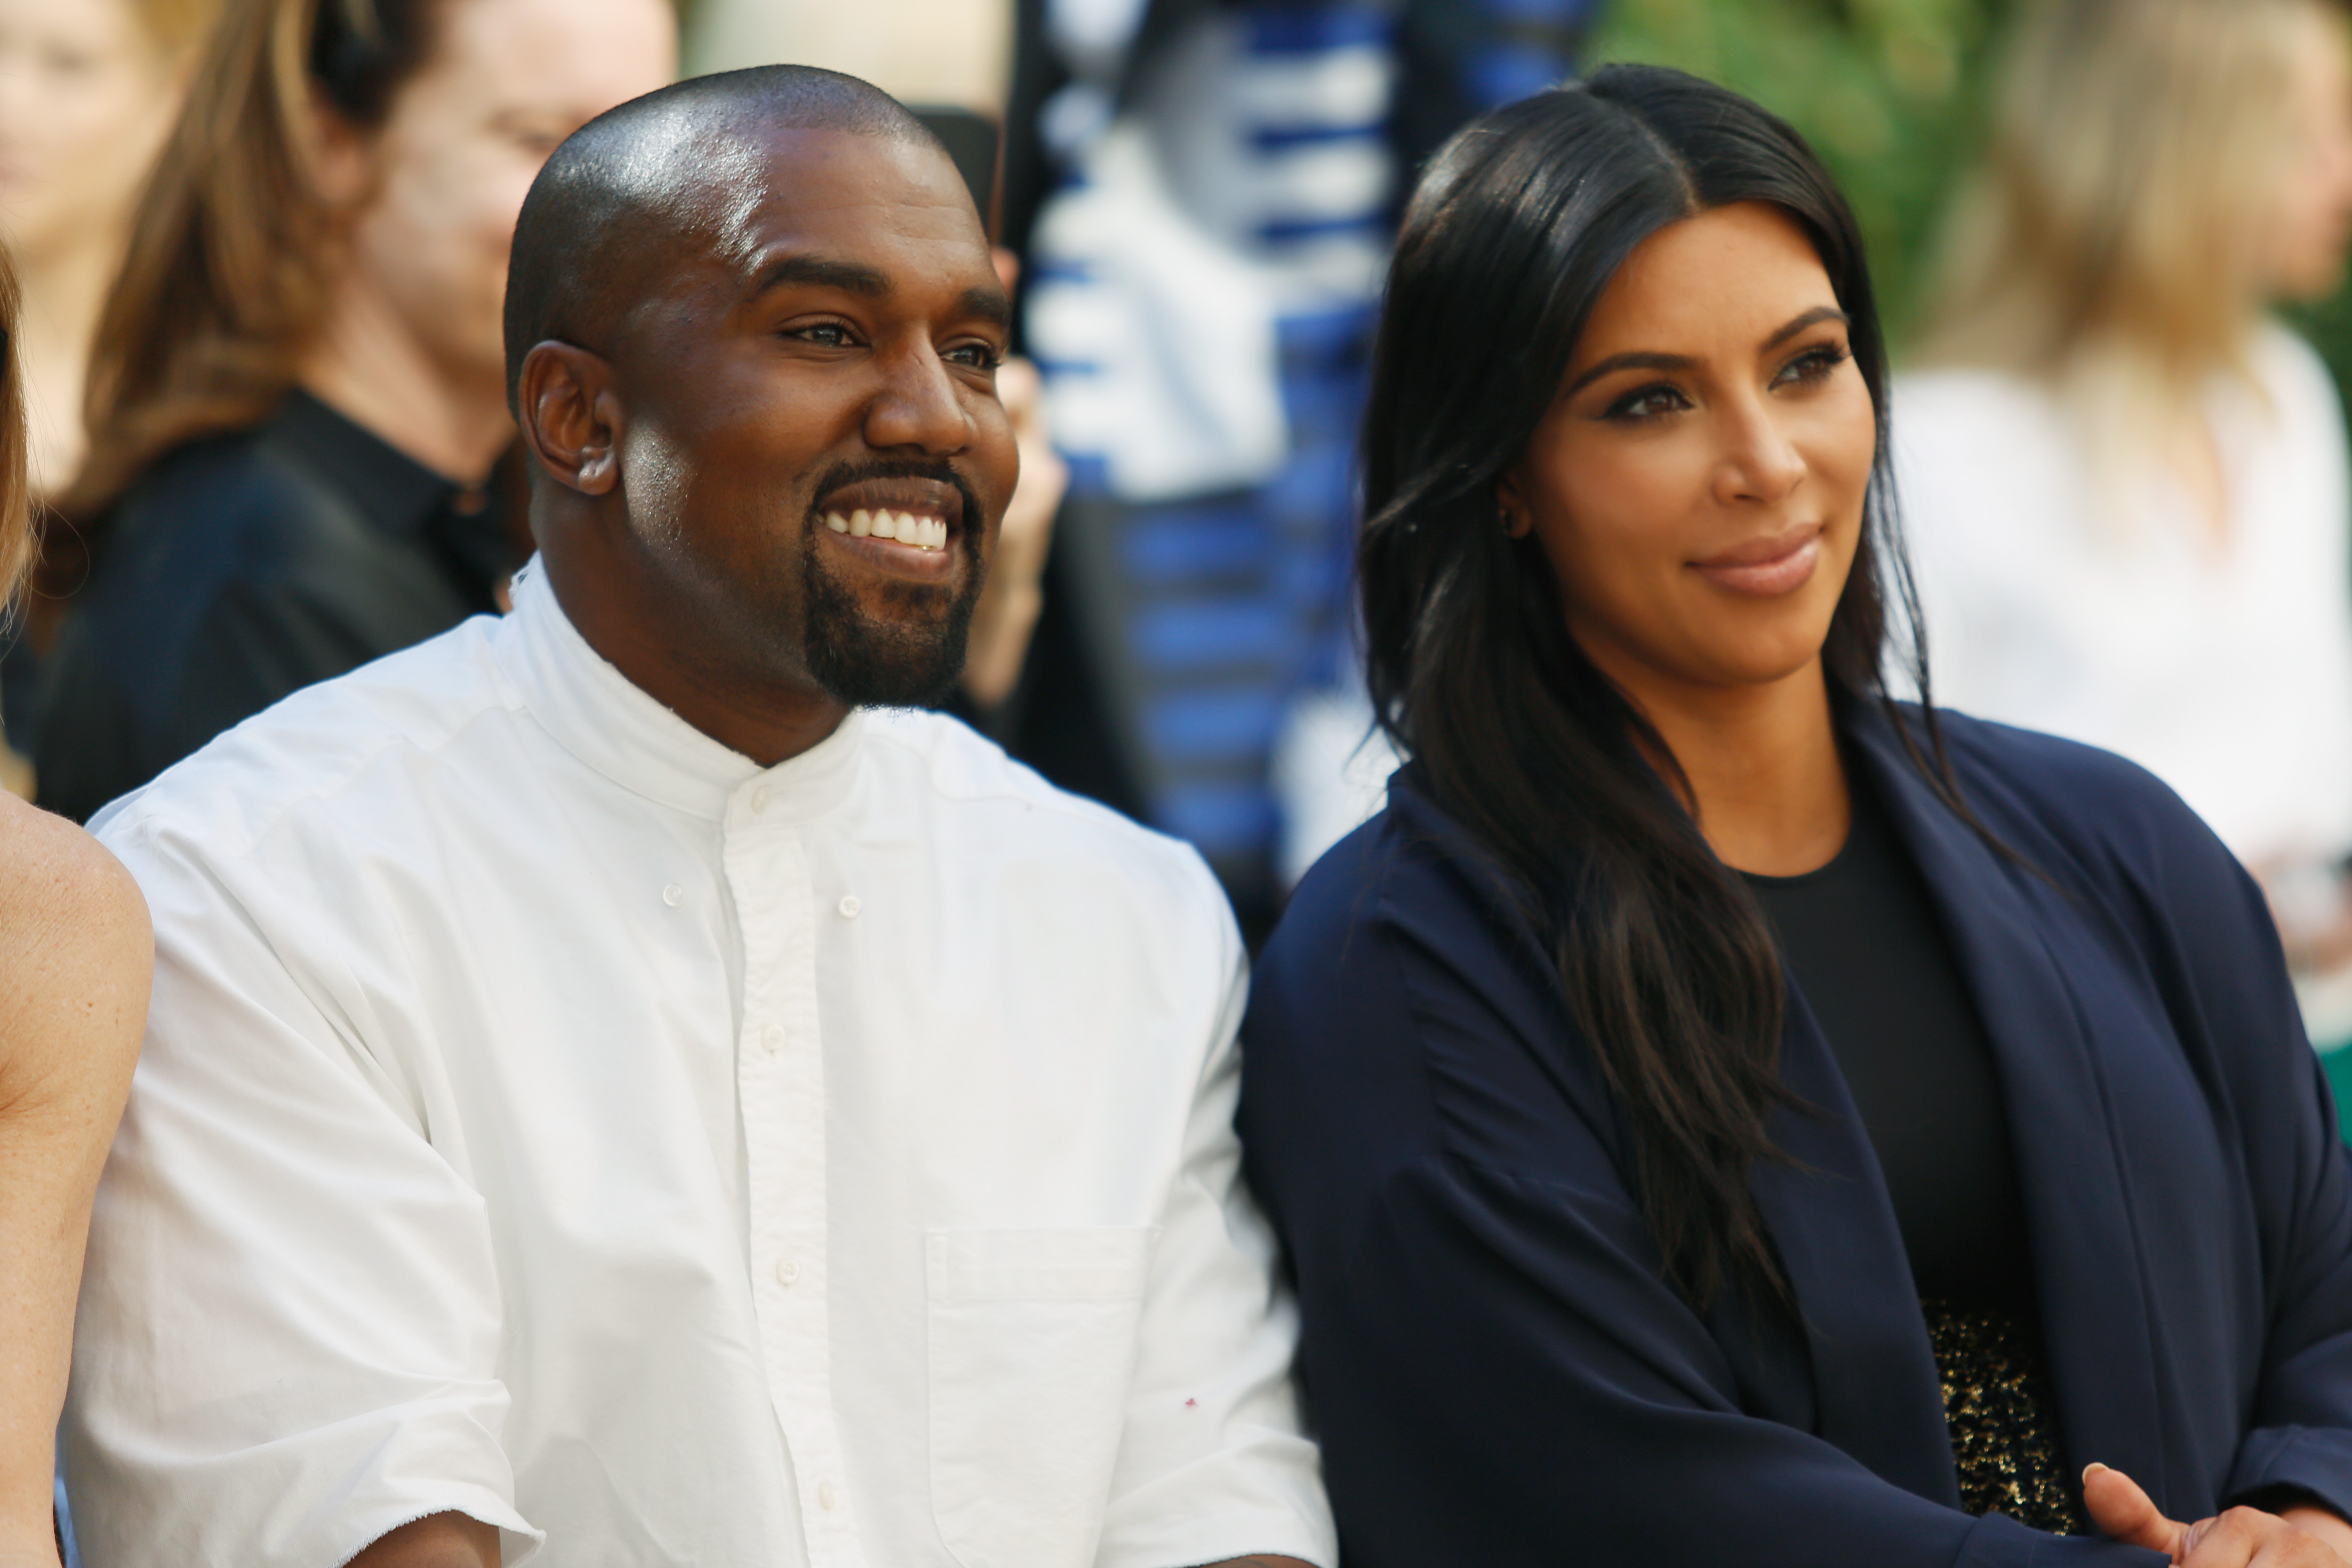 Kanye West and Kim Kardashian attend CFDA/Vogue Fashion Fund Show on Oct. 20, 2015 in Los Angeles, CA. (Jeff Vespa—Getty Images)